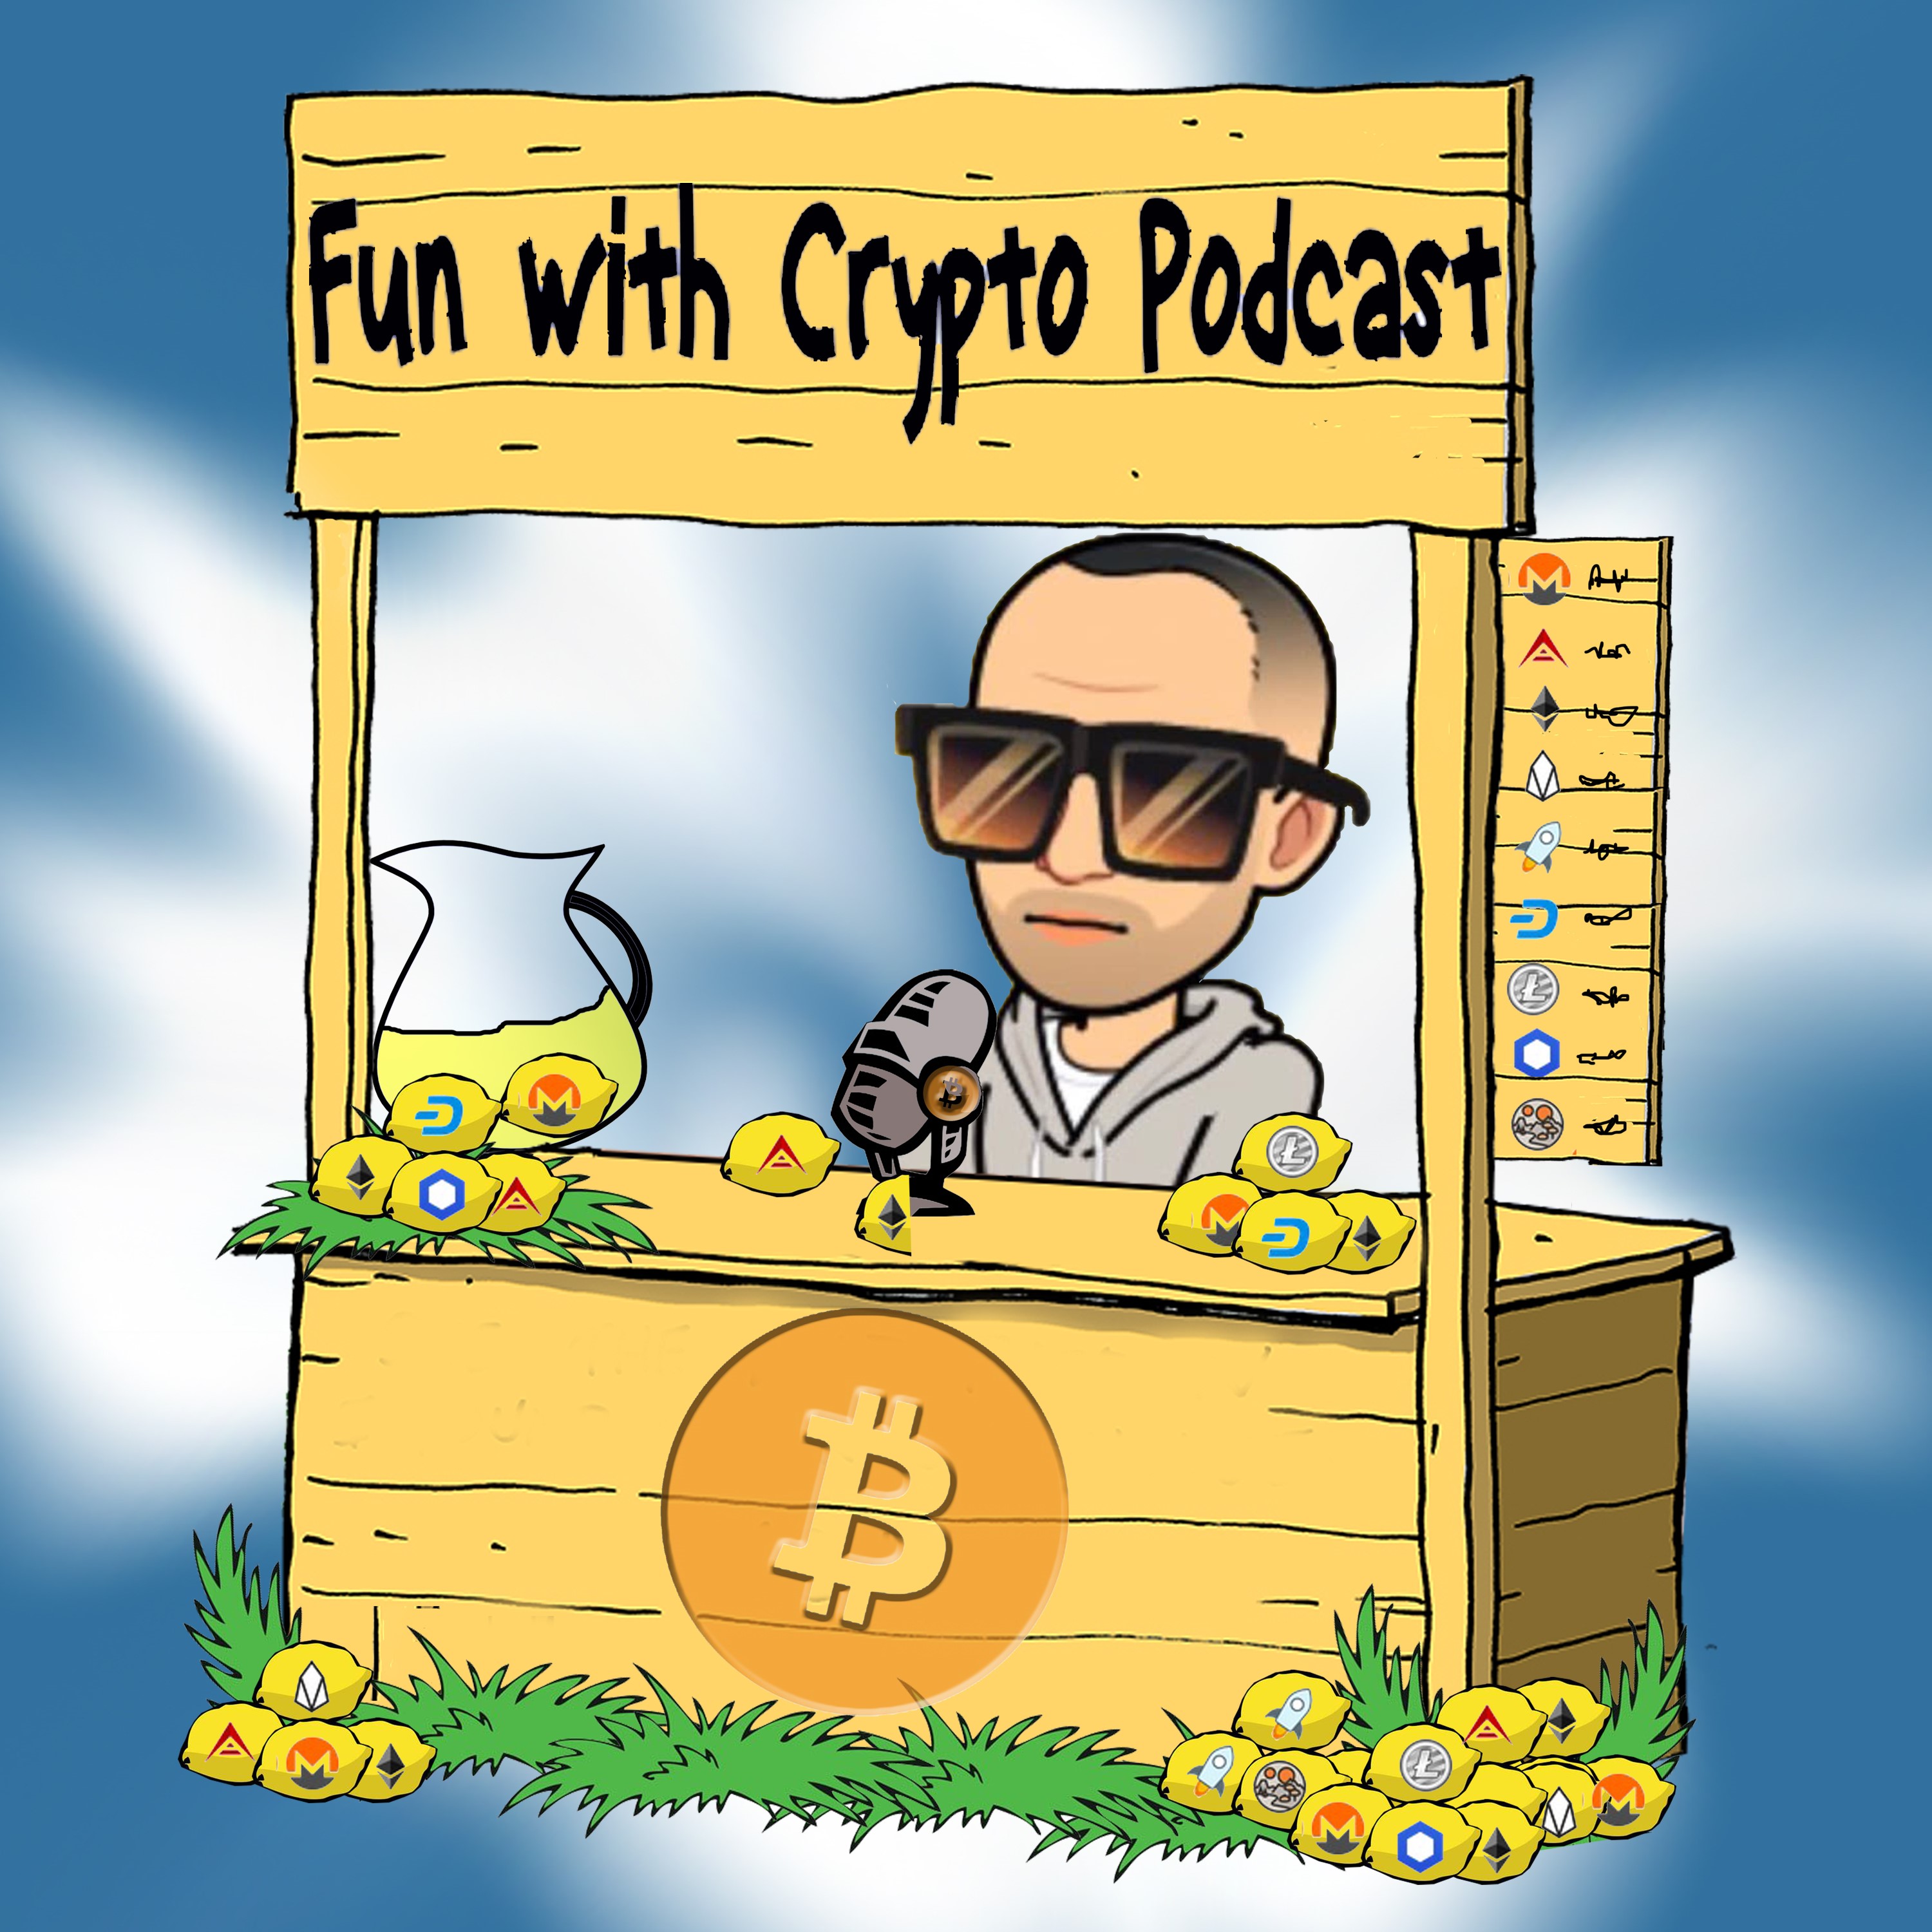 10 Questions w/ The Fun w/ Crypto Podcast